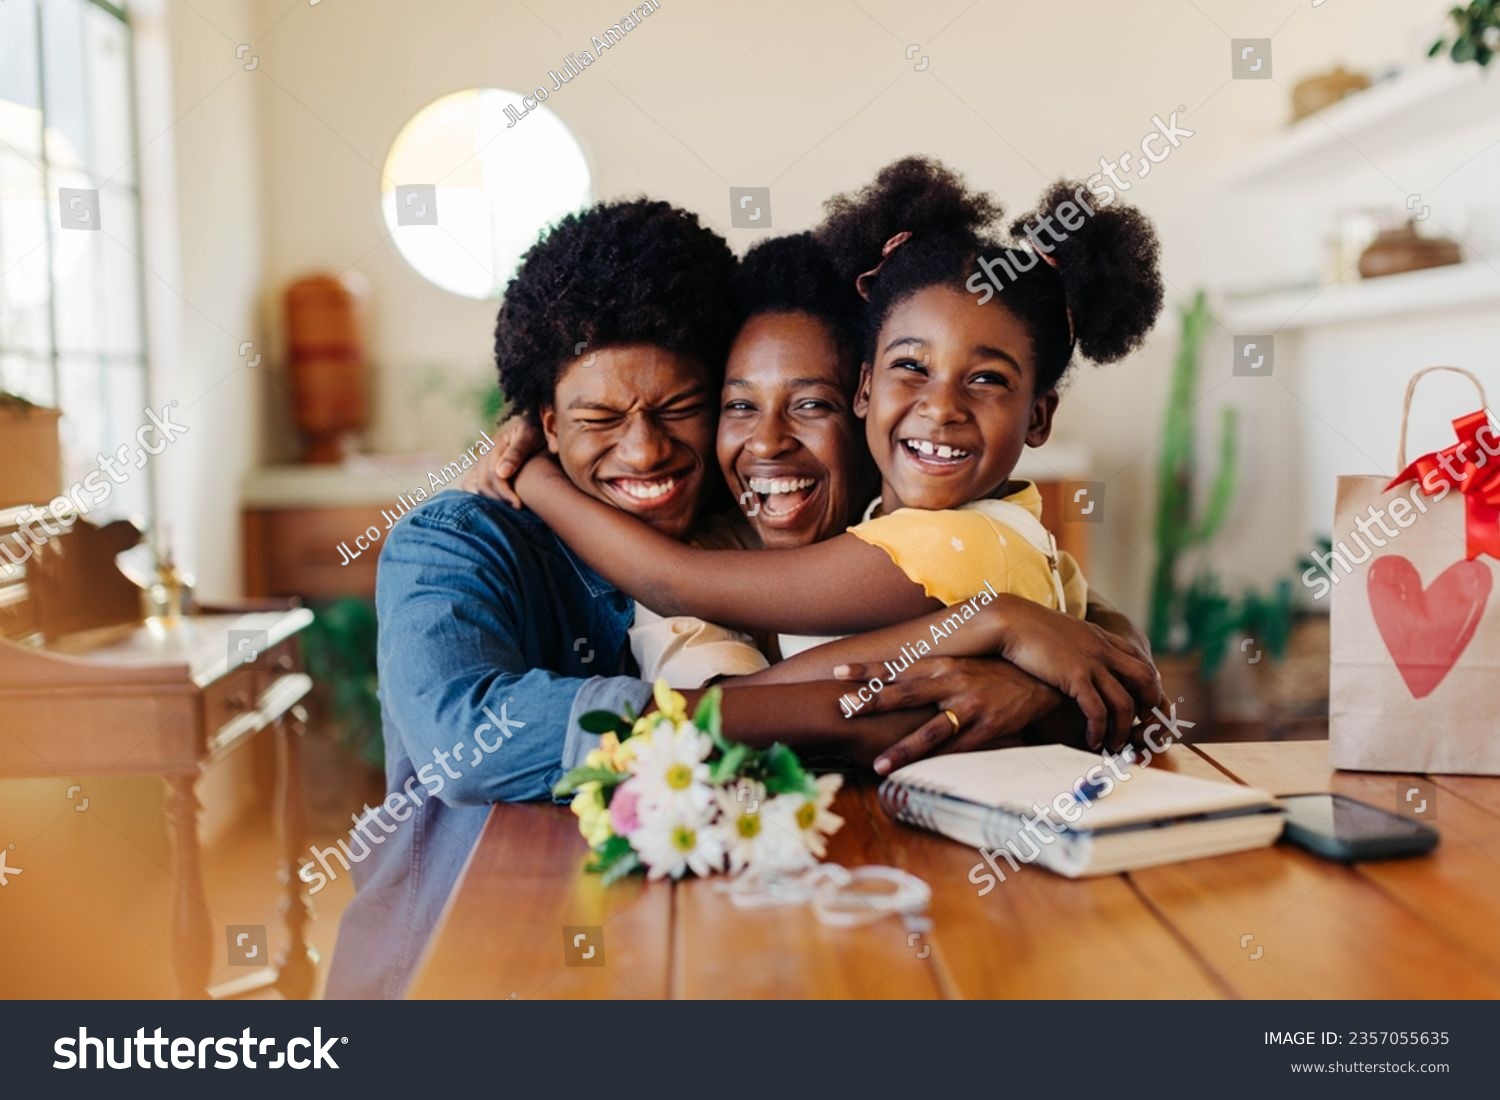 Happy family celebrating together at home. Kids give their mom a bouquet of flowers, bringing joy and love. Special moment showing the beauty of motherhood and the happiness found in simple gestures. #2357055635